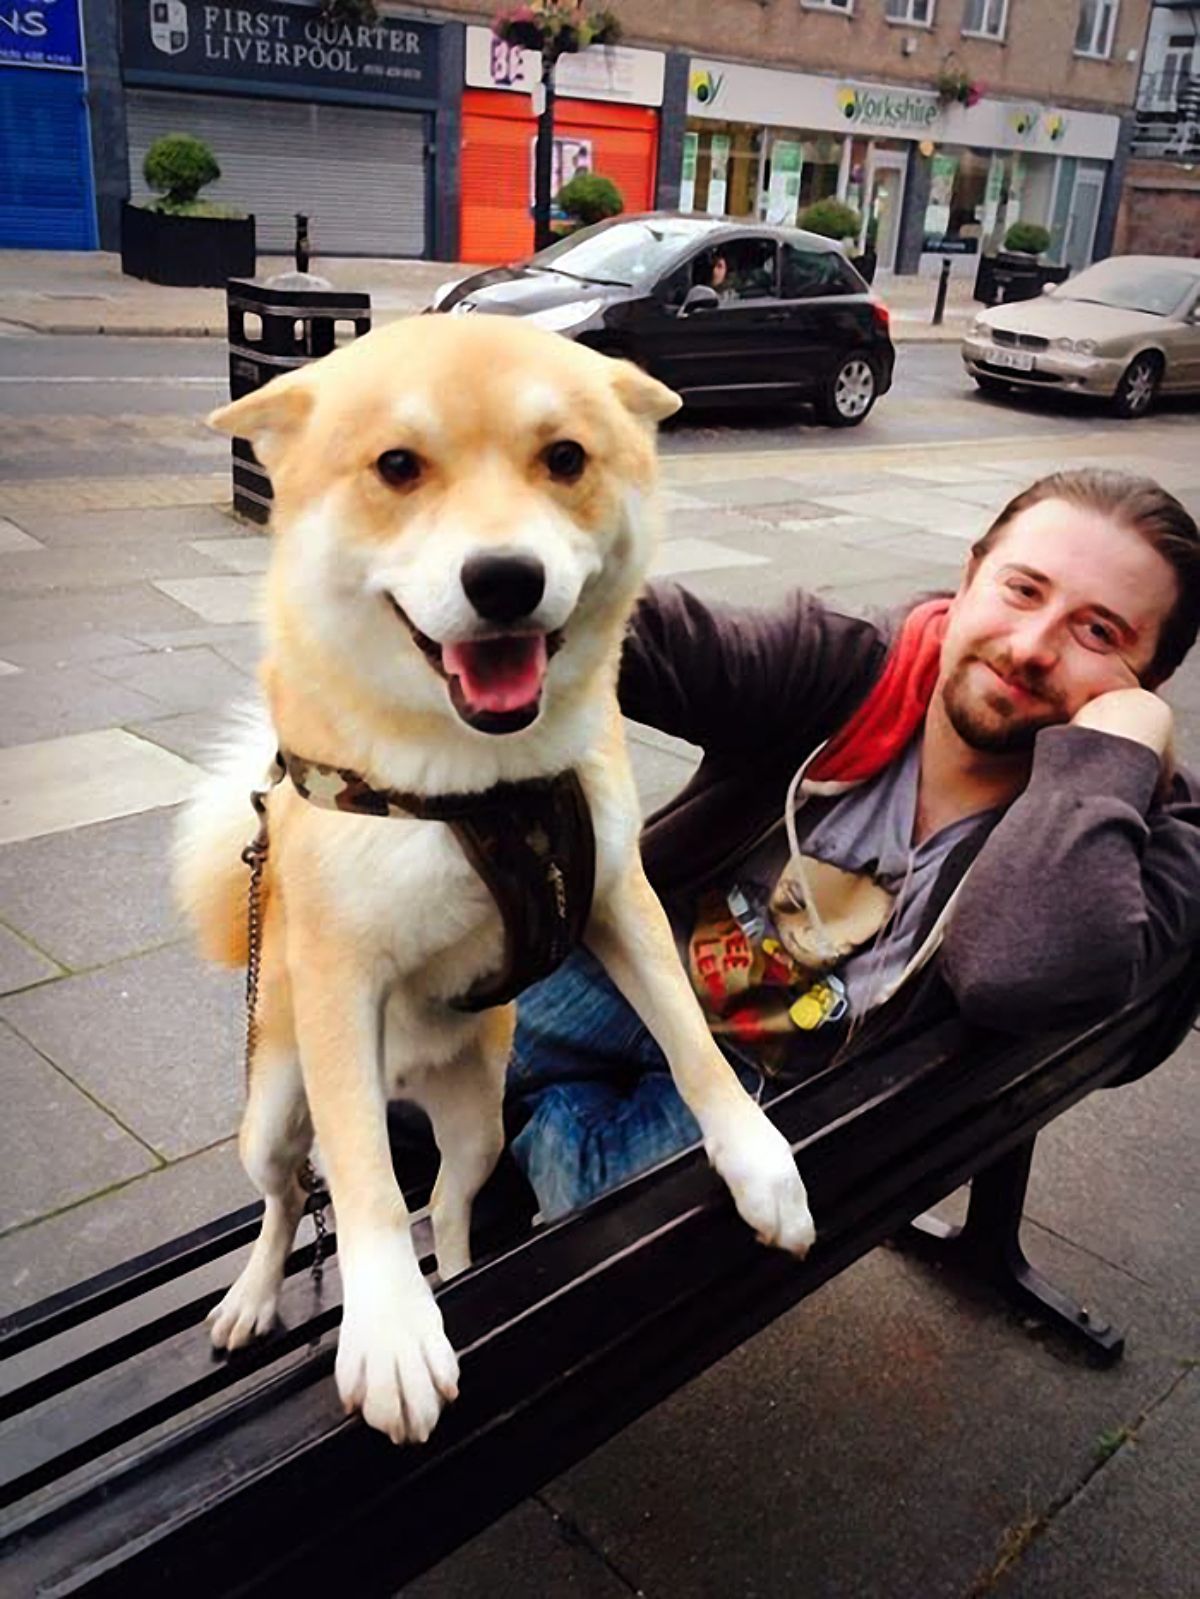 smiling brown and white dog in a black harness standing on hind legs on a bench next to a man